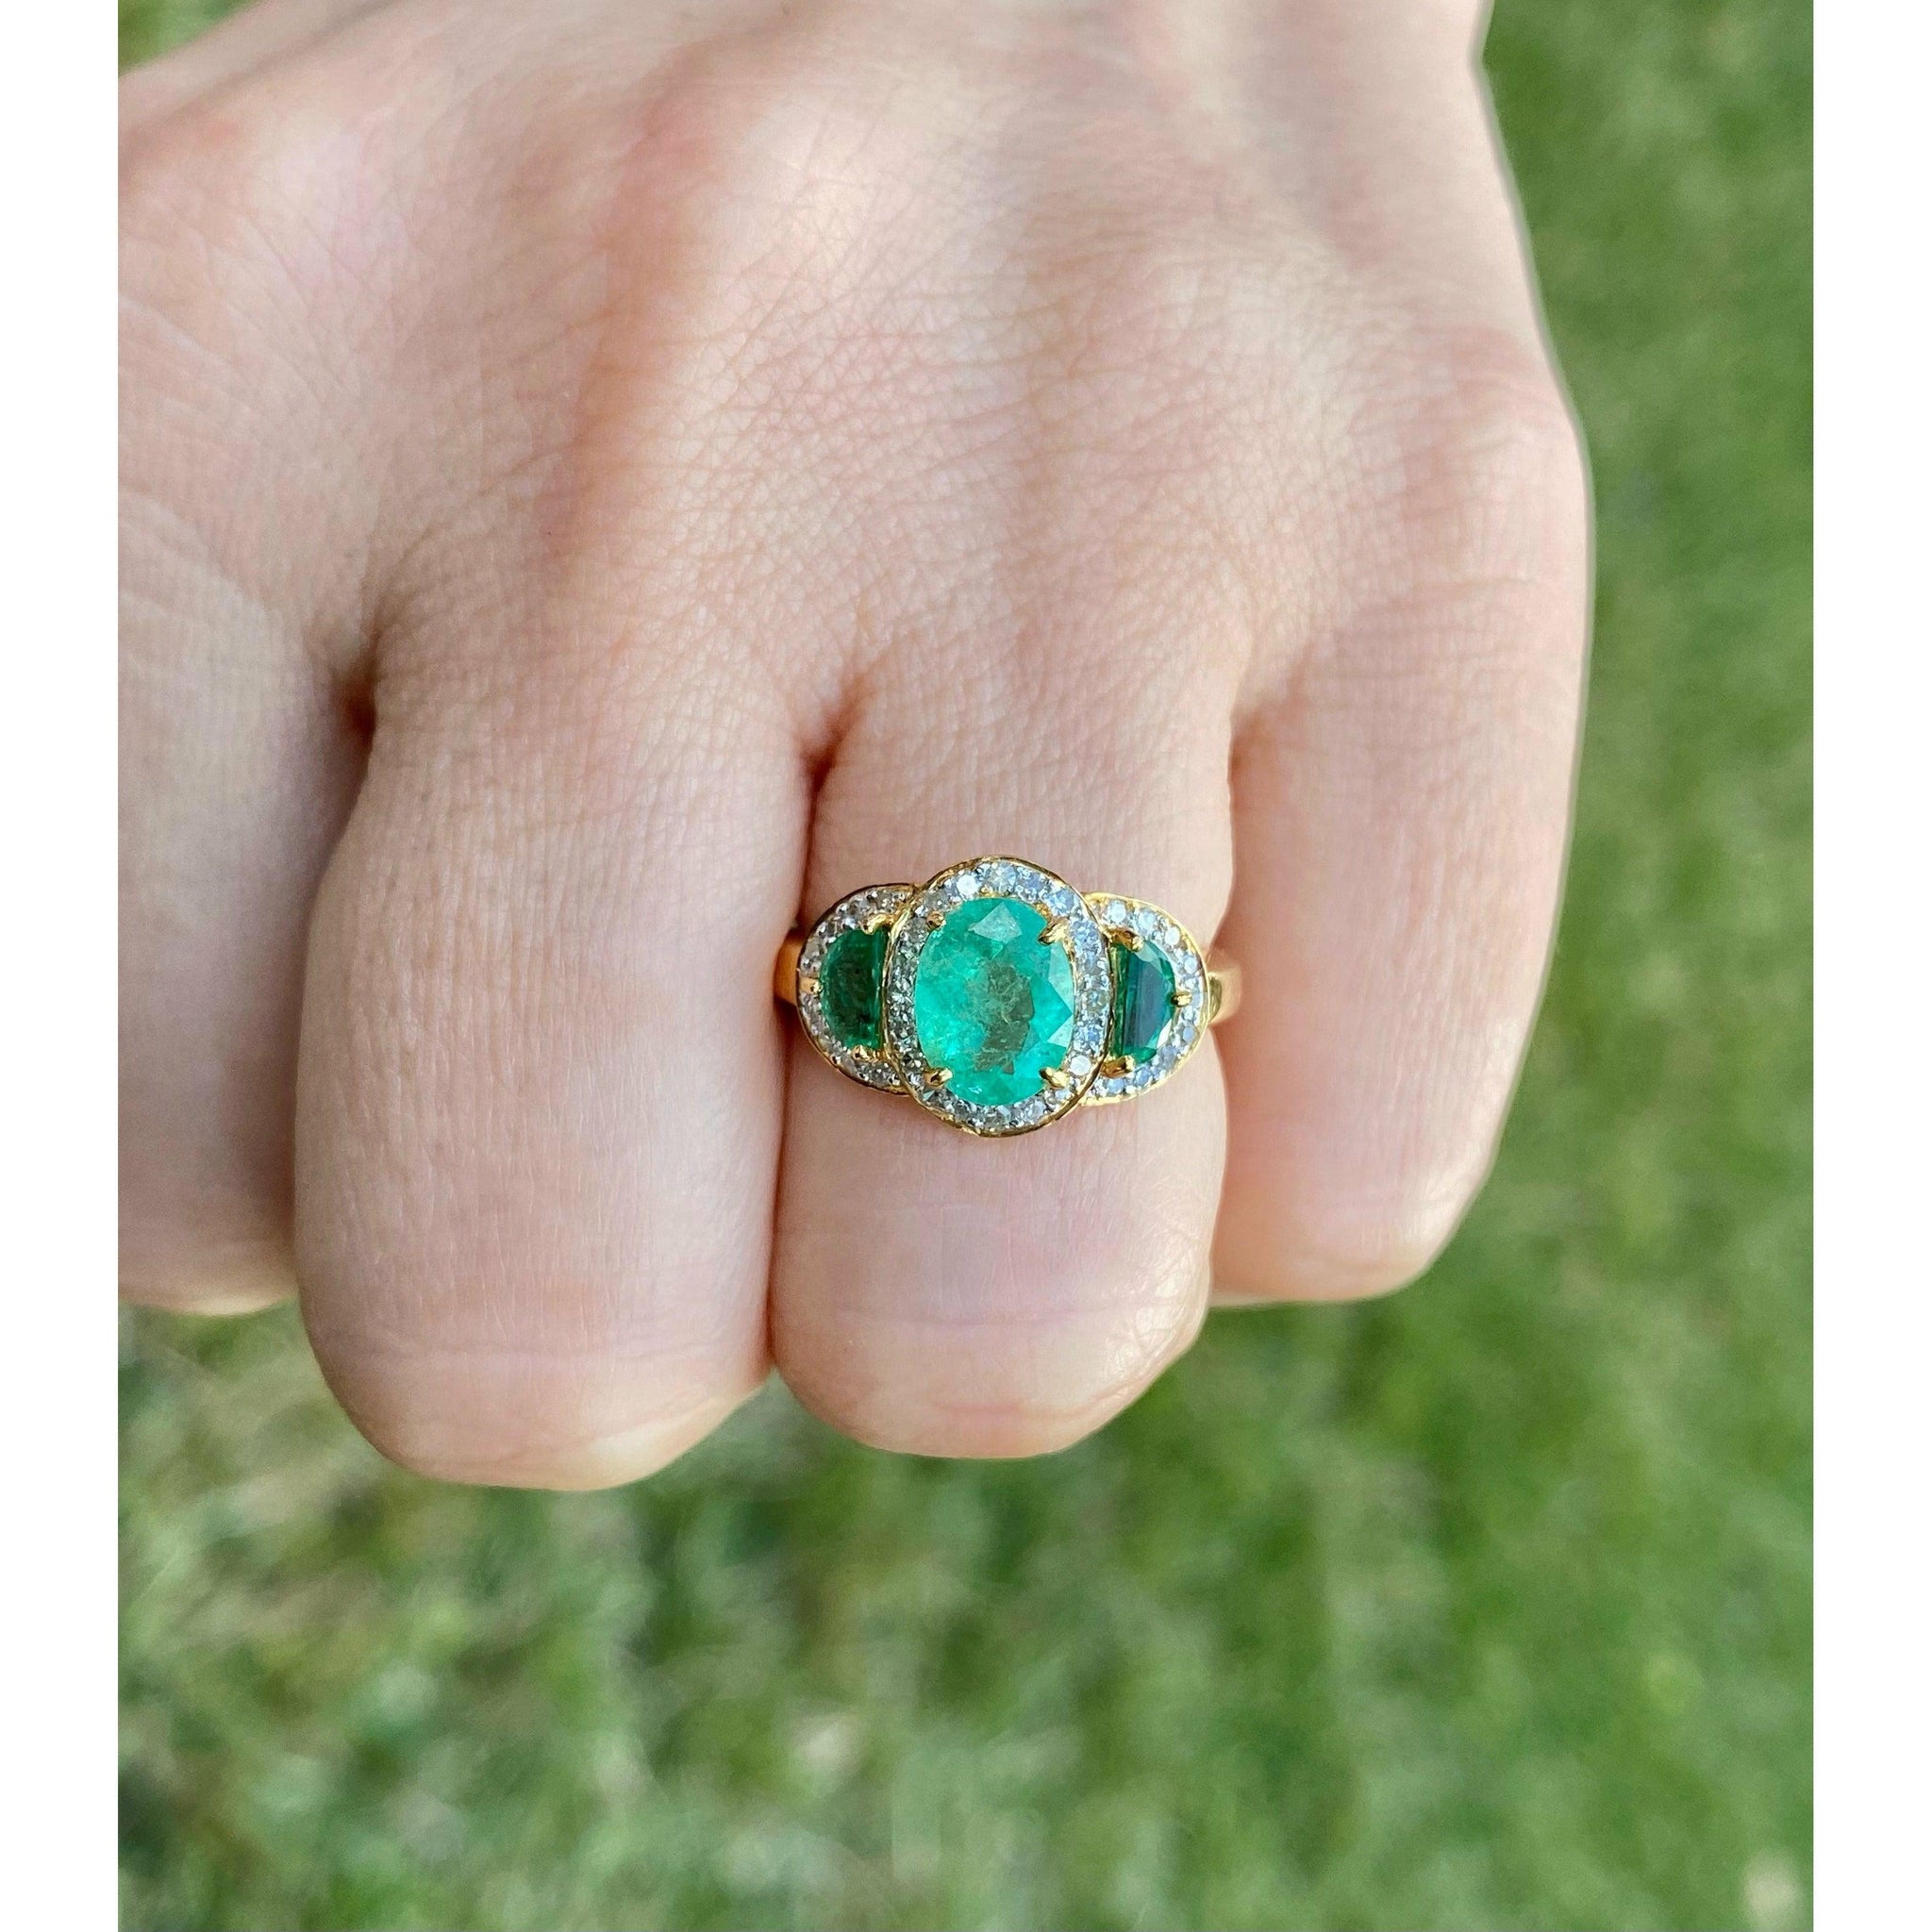 Vintage 3 stone oval cut Colombian Emerald Ring in 18k Yellow Gold - ASSAY